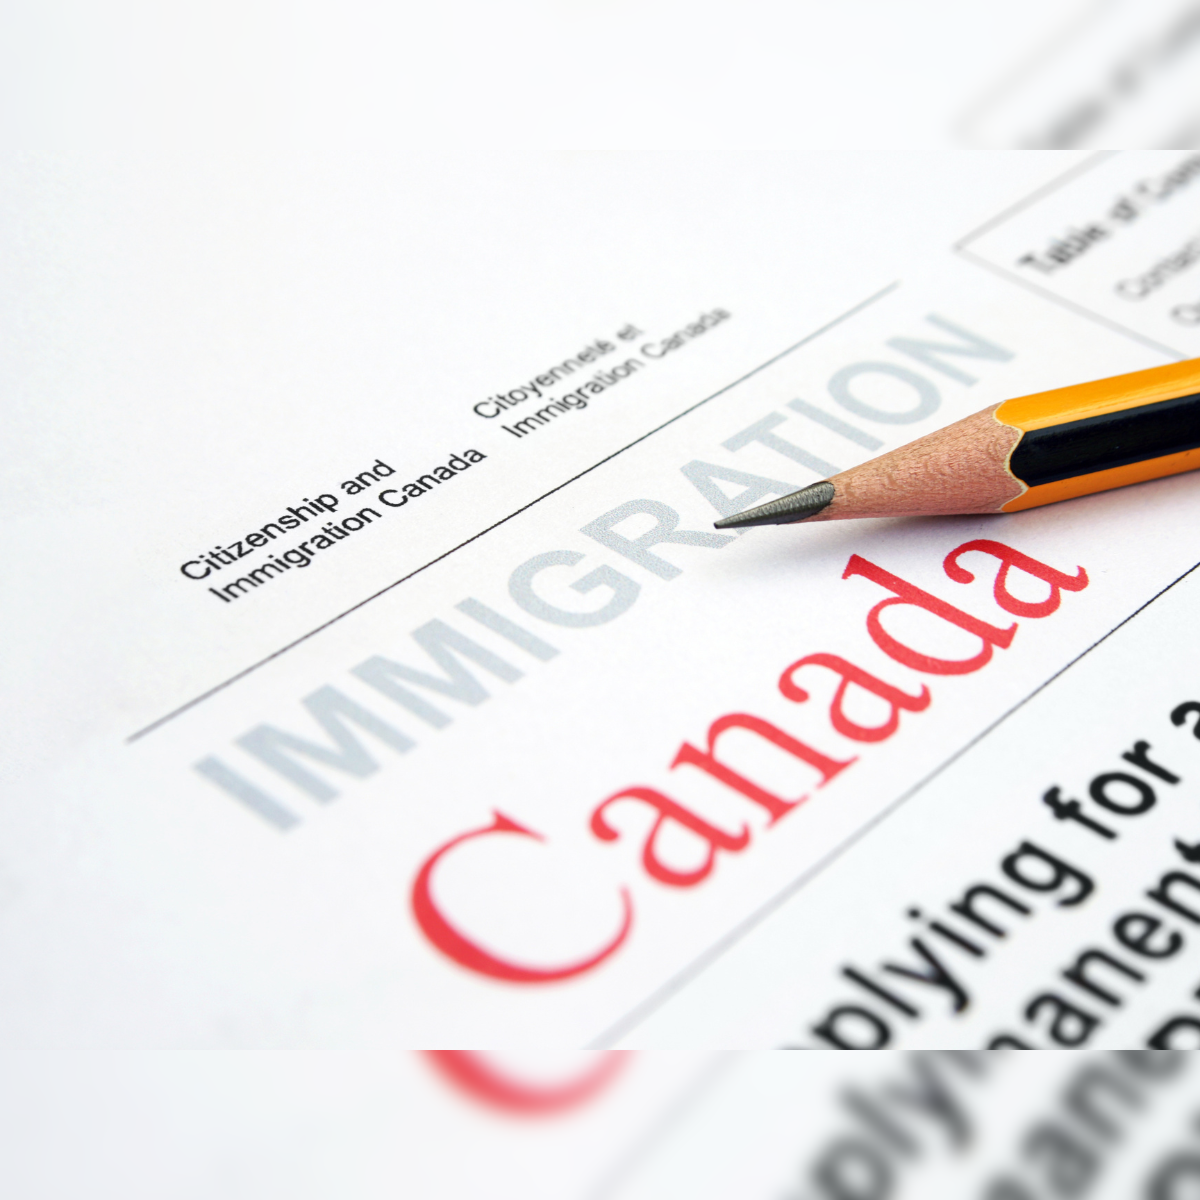 Canada PR: Canada launches new process to welcome skilled workers